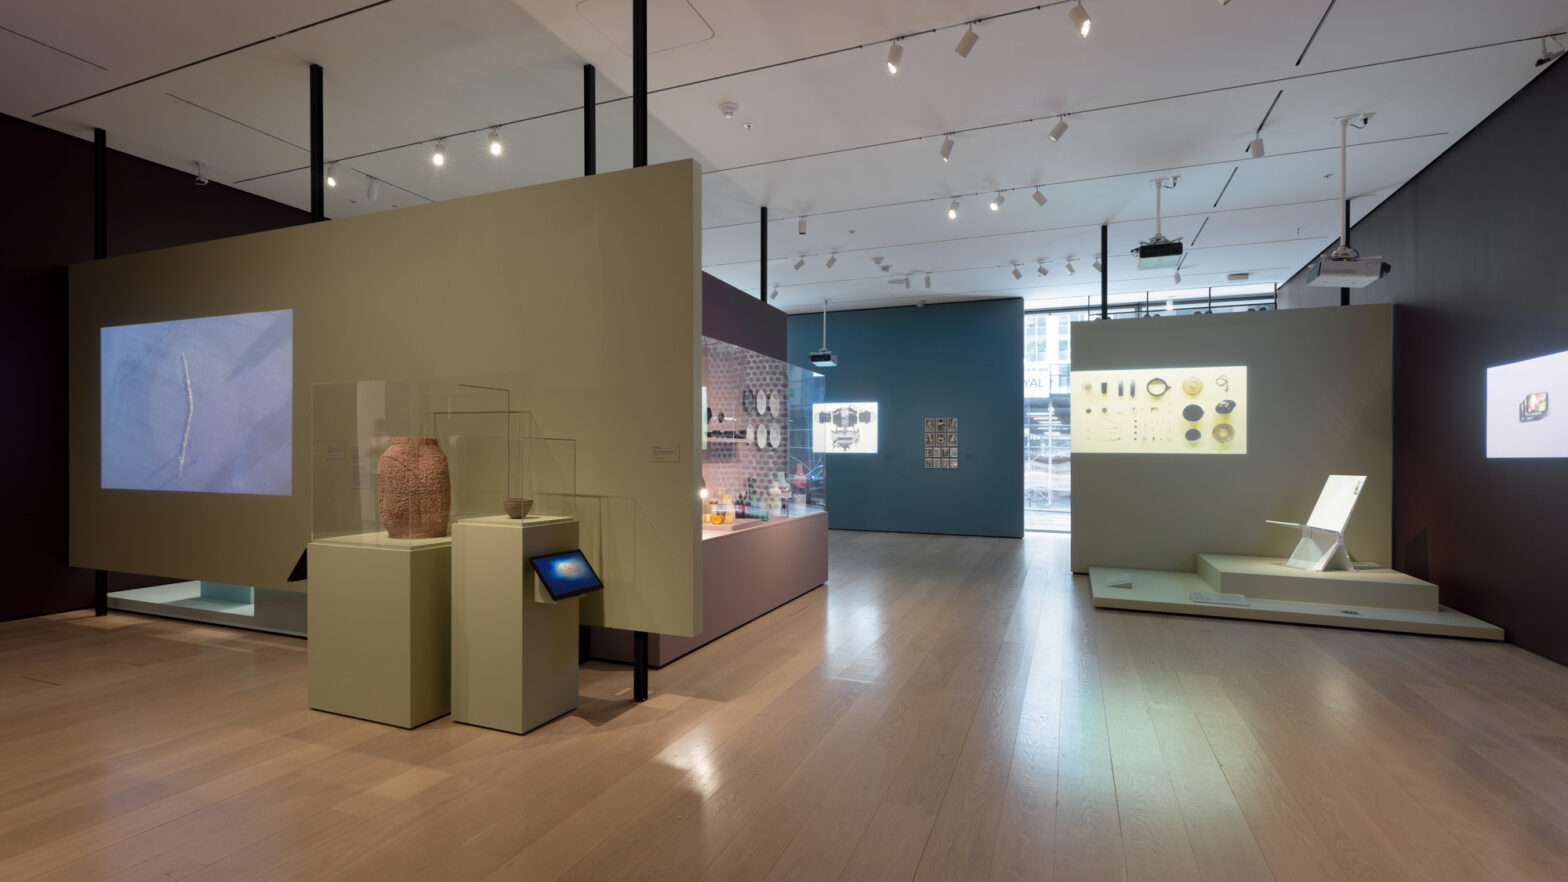 A room contains a variety of vases, glasses, and works from the MoMA exhibition “Life Cycles: The Materials of Contemporary Design.”